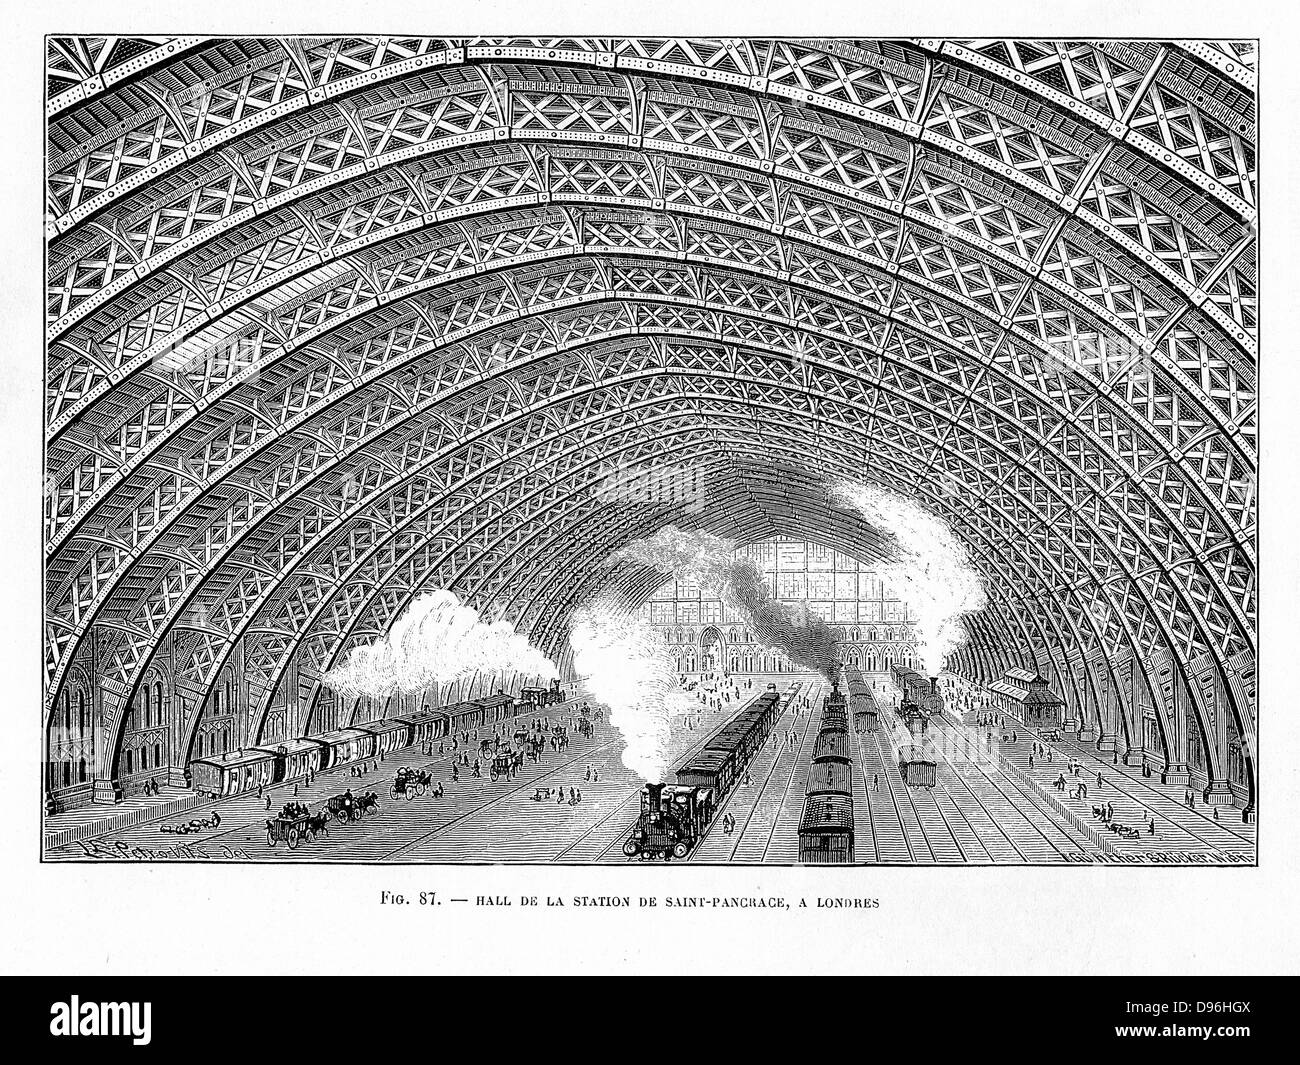 Interior of St Pancras Railway Station, London 1865. Using an iron latticed arched roofand by dispensing with struts and ties,WJ Barlow and RM Marsh were able to construct clean arch 100ft high with span of 140ft. Engraving. Stock Photo